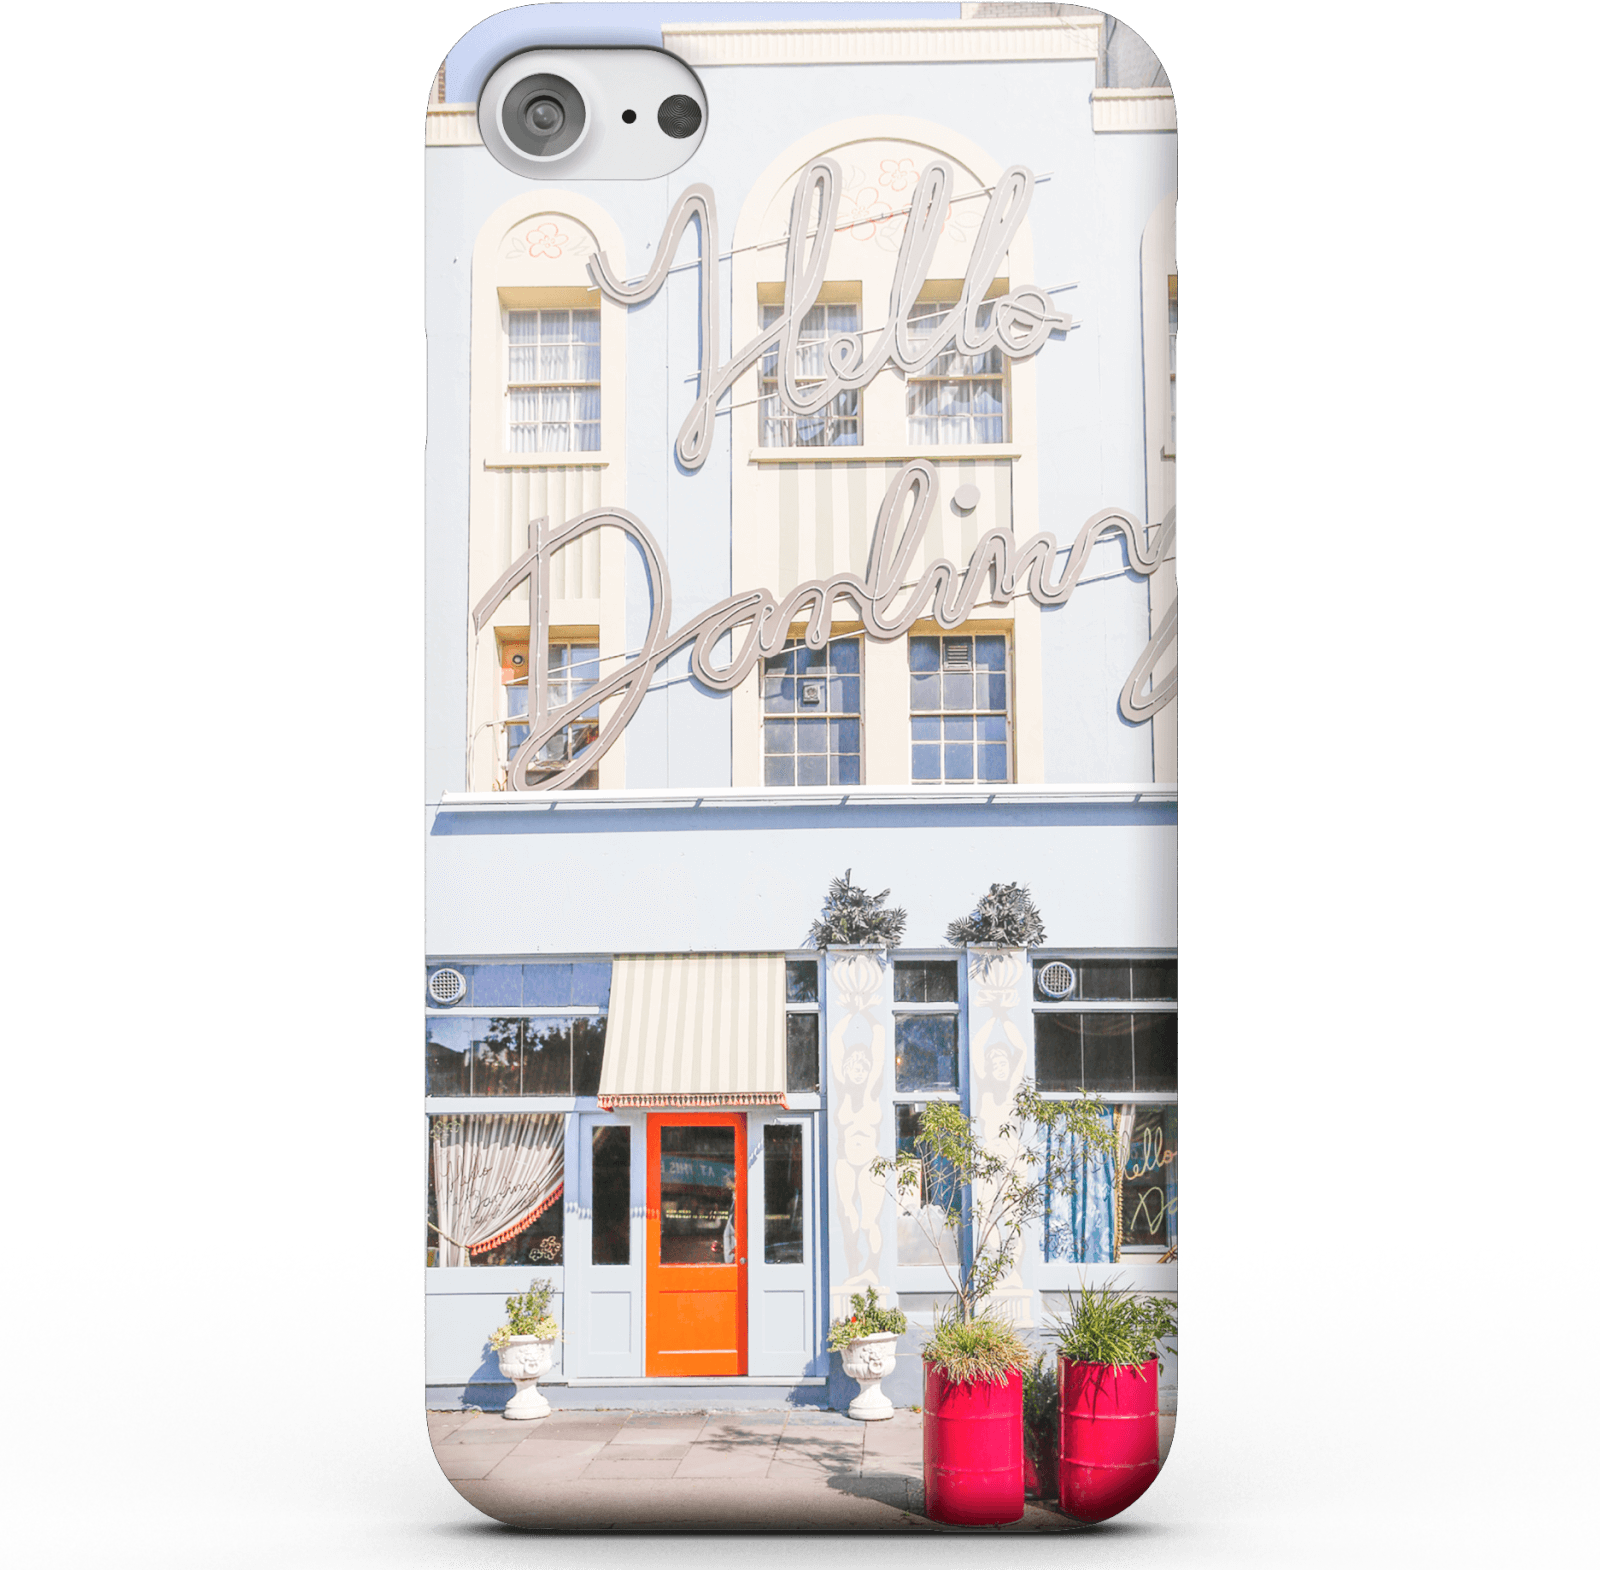 Jazzy Building Phone Case for iPhone and Android - iPhone 5/5s - Snap Case - Matte